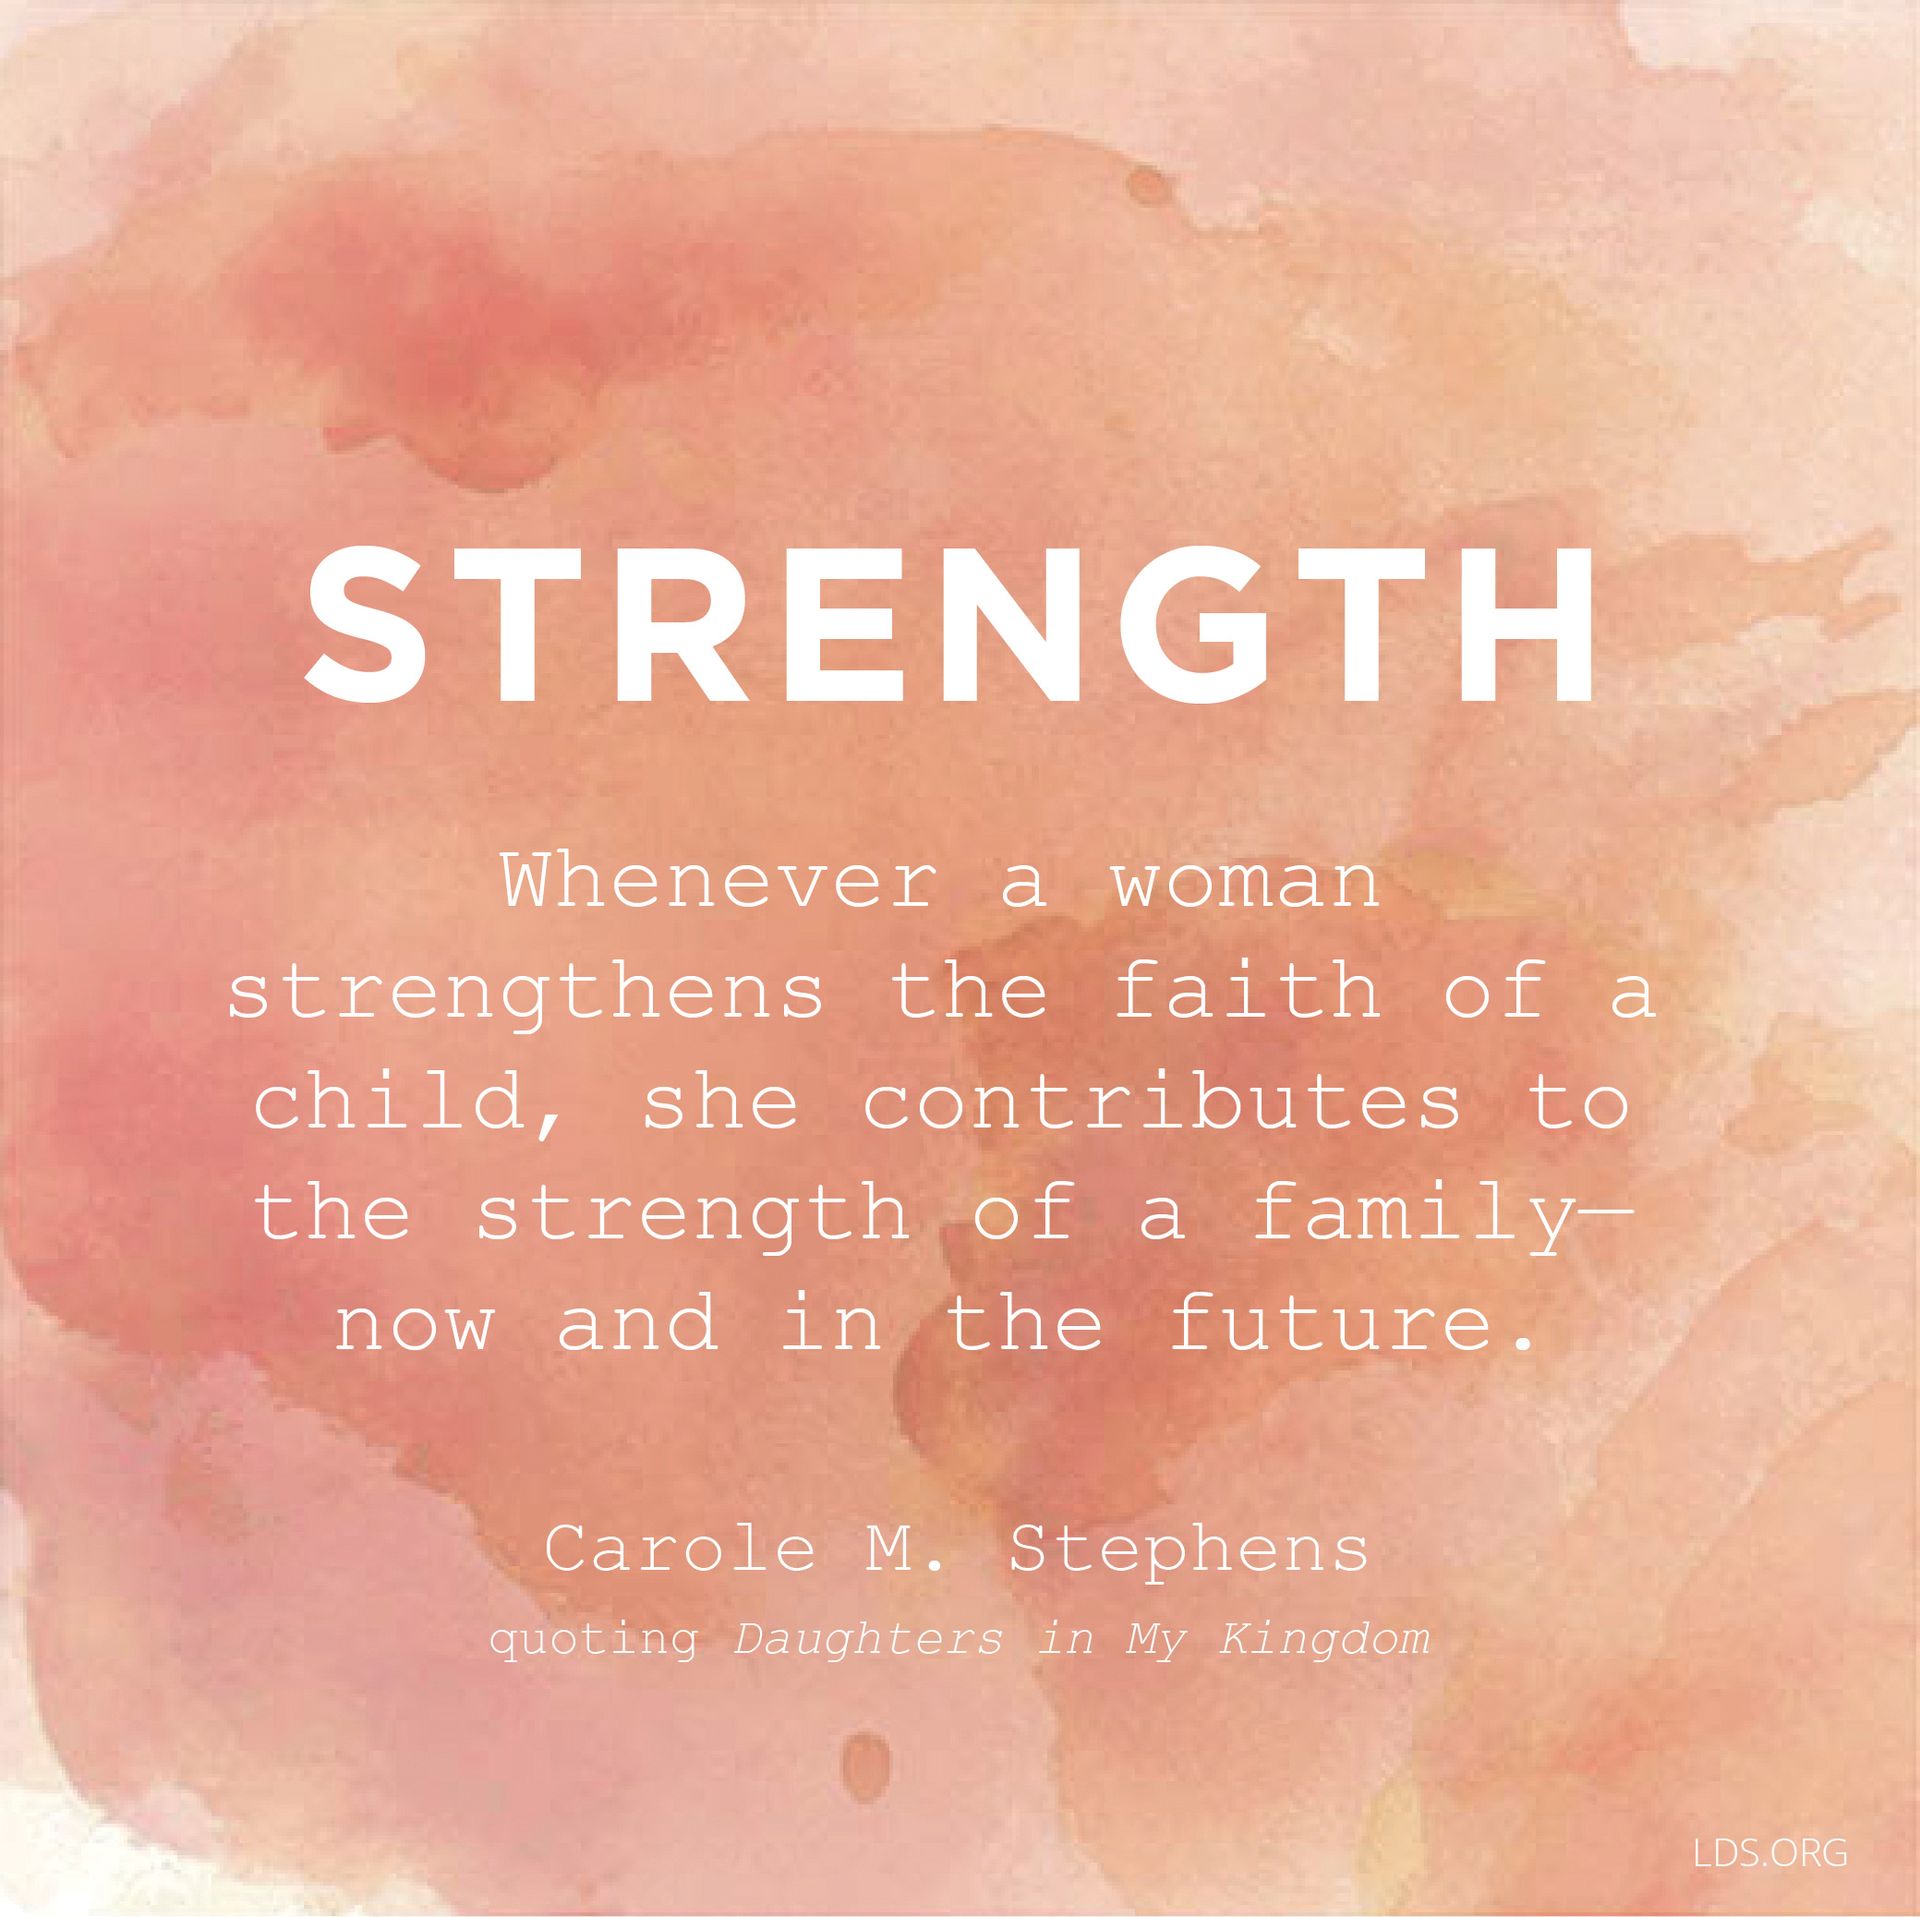 “Whenever a woman strengthens the faith of a child, she contributes to the strength of a family—now and in the future.”—Sister Carole M. Stephens, quoting Daughters in My Kingdom In “The Family Is of God”